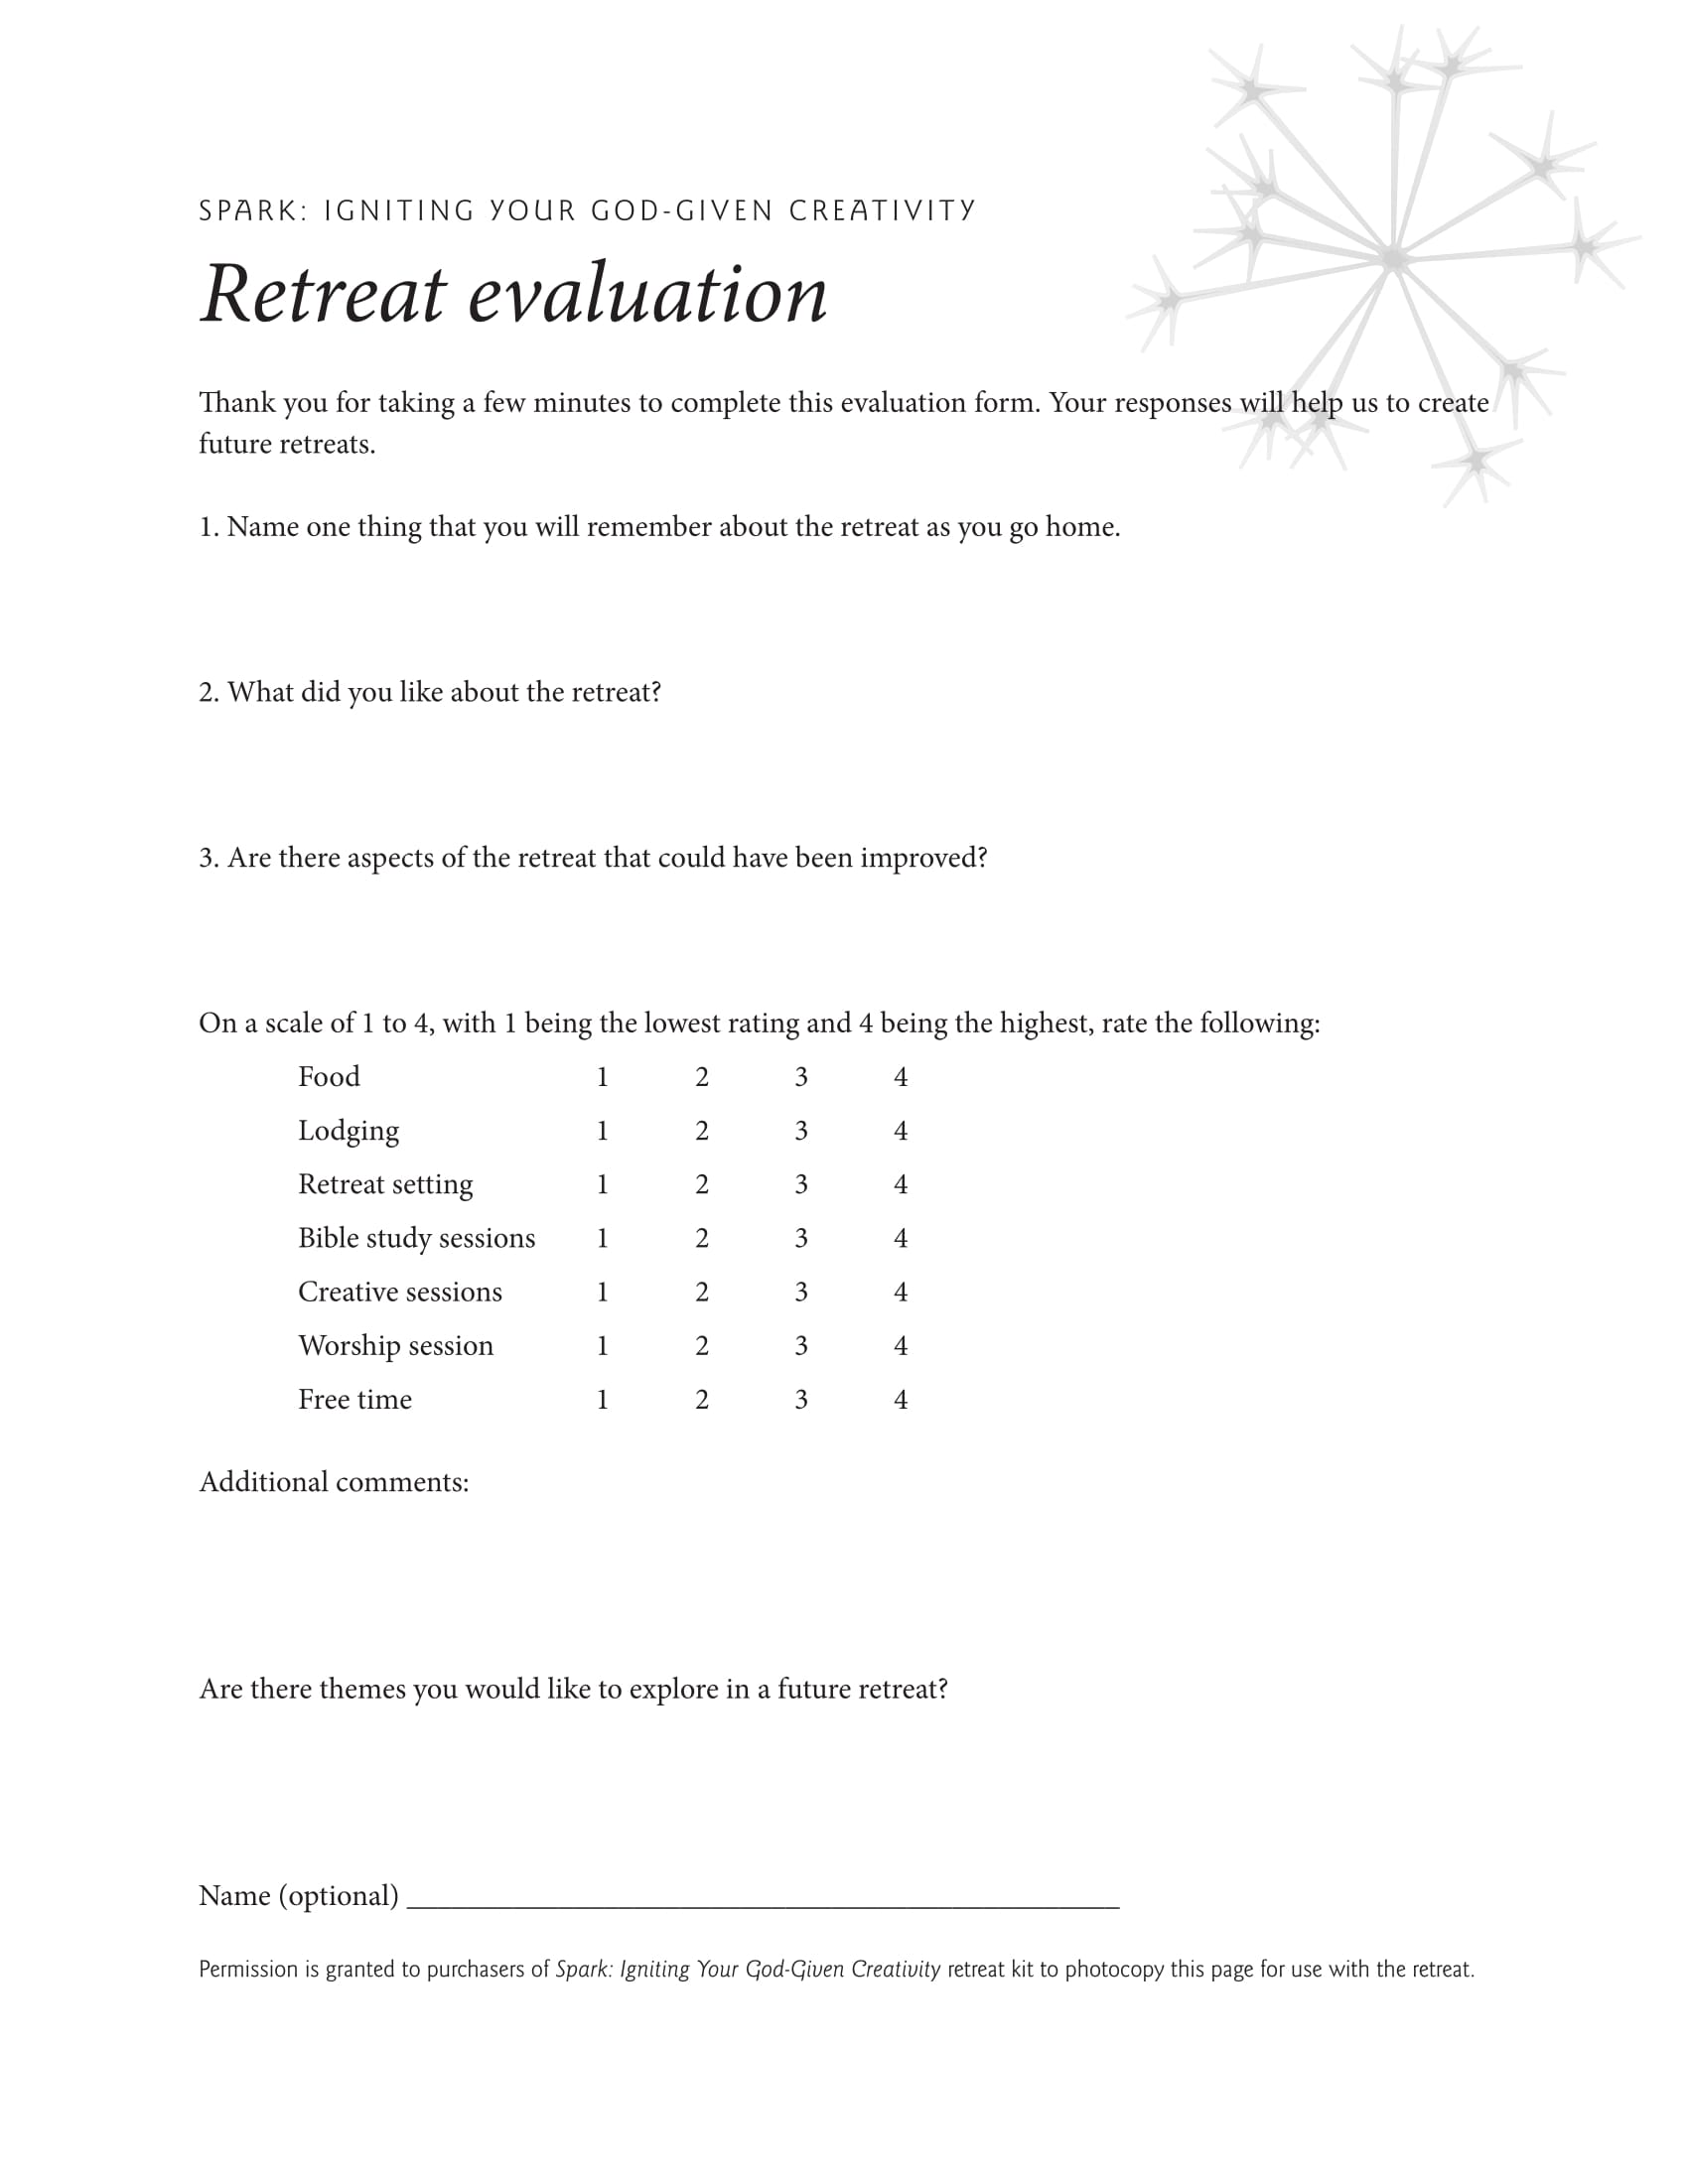 ministry retreat evaluation form 1